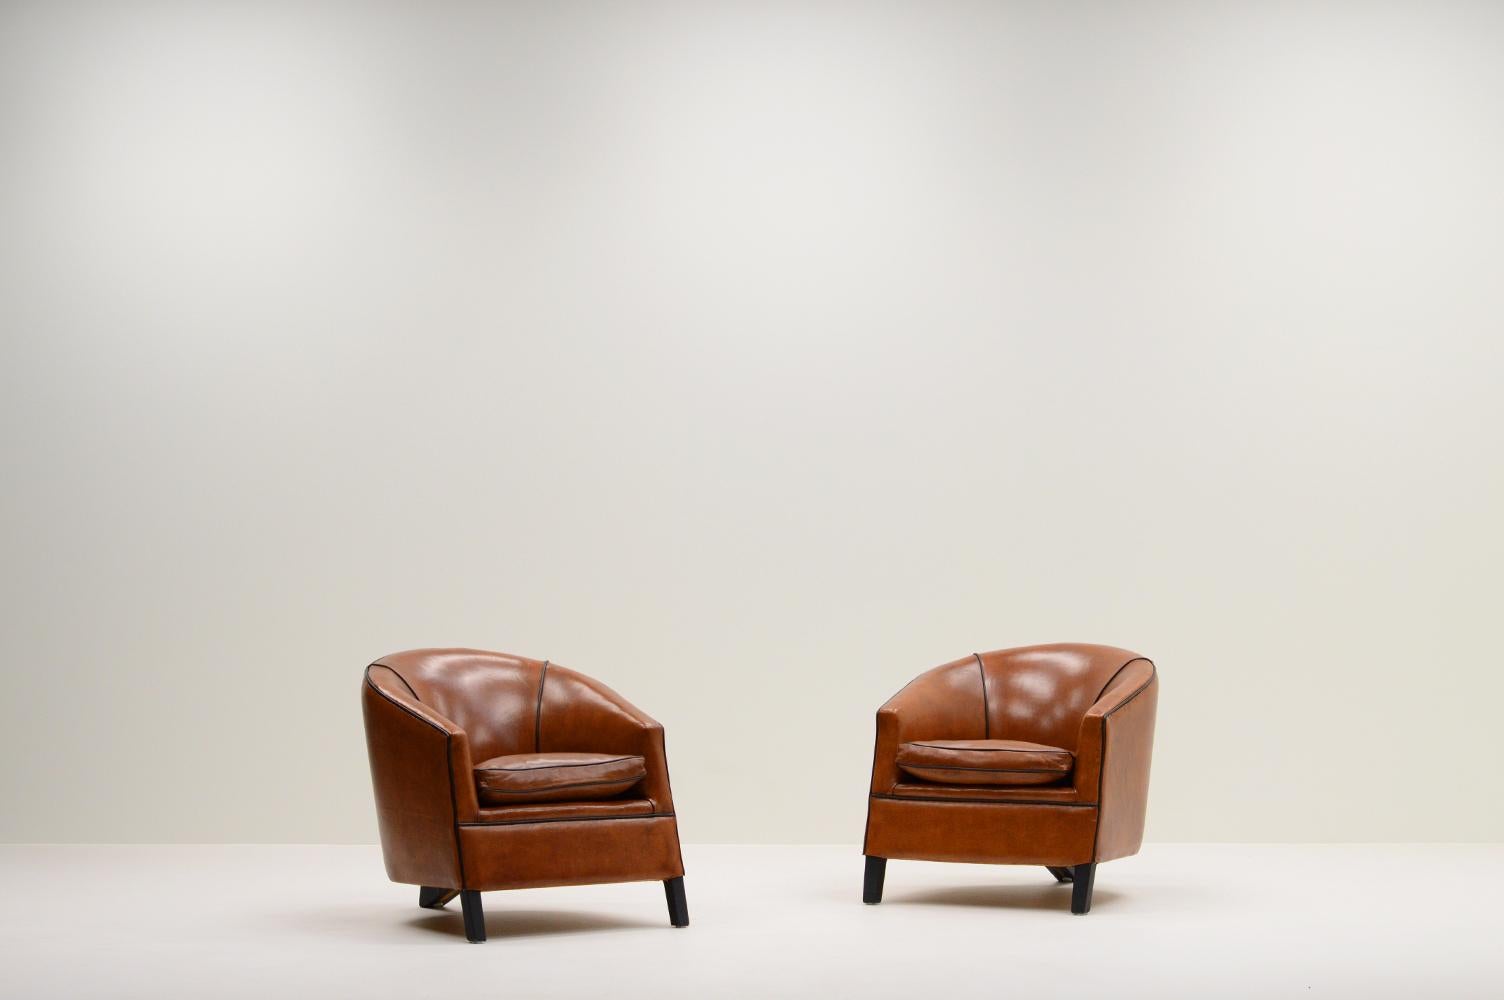 “Charel” chair by Bart van Bekhoven, 1980s The Netherlands. Bart is know for his unique designs. The chairs are professionally reupholstered with the finest scheep leather from New Zealand and patinated. The chair has 3 legs upholstered with black